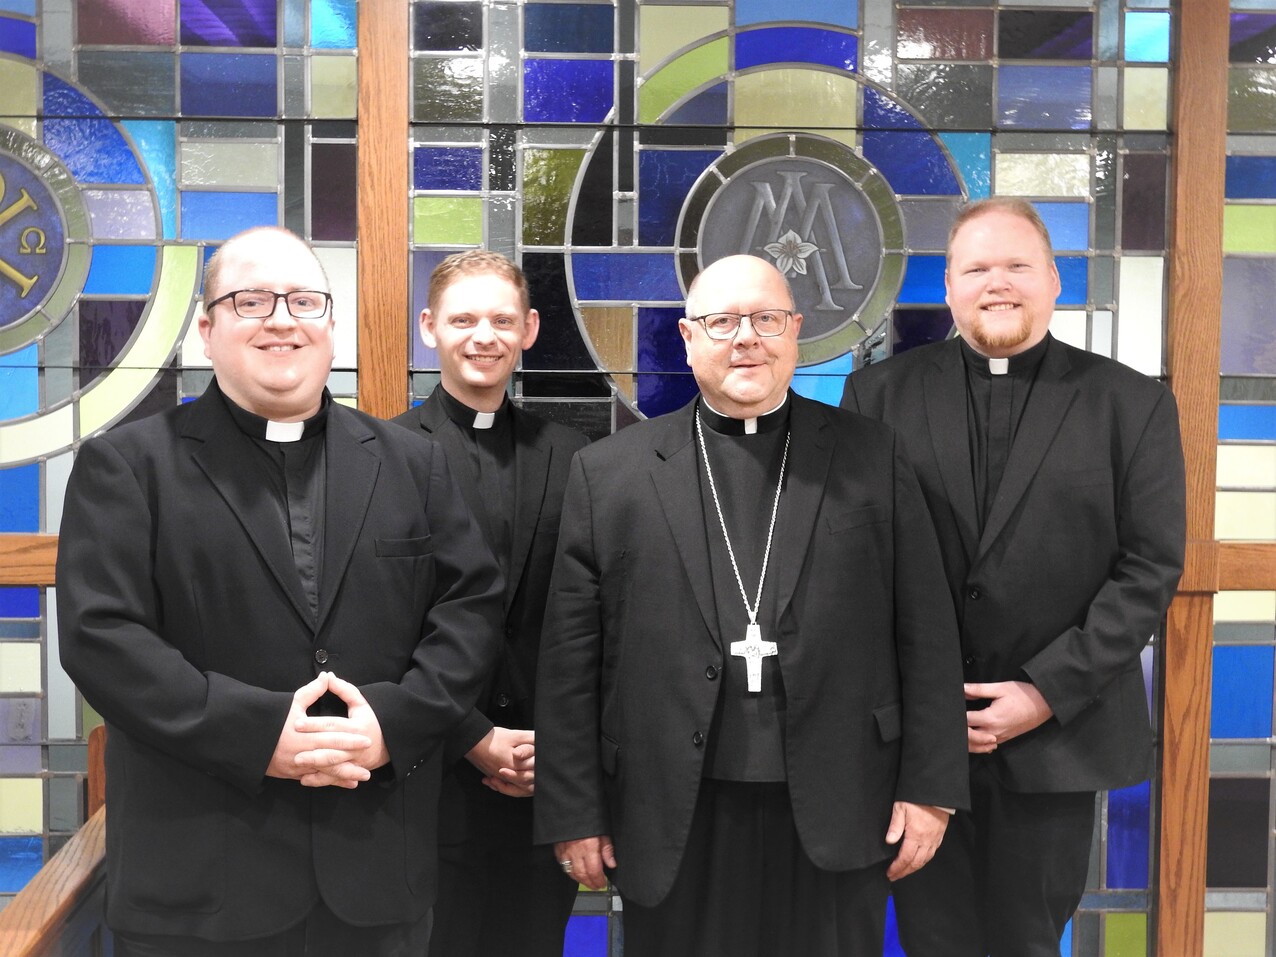 Three deacons will be ordained to the priesthood on May 21